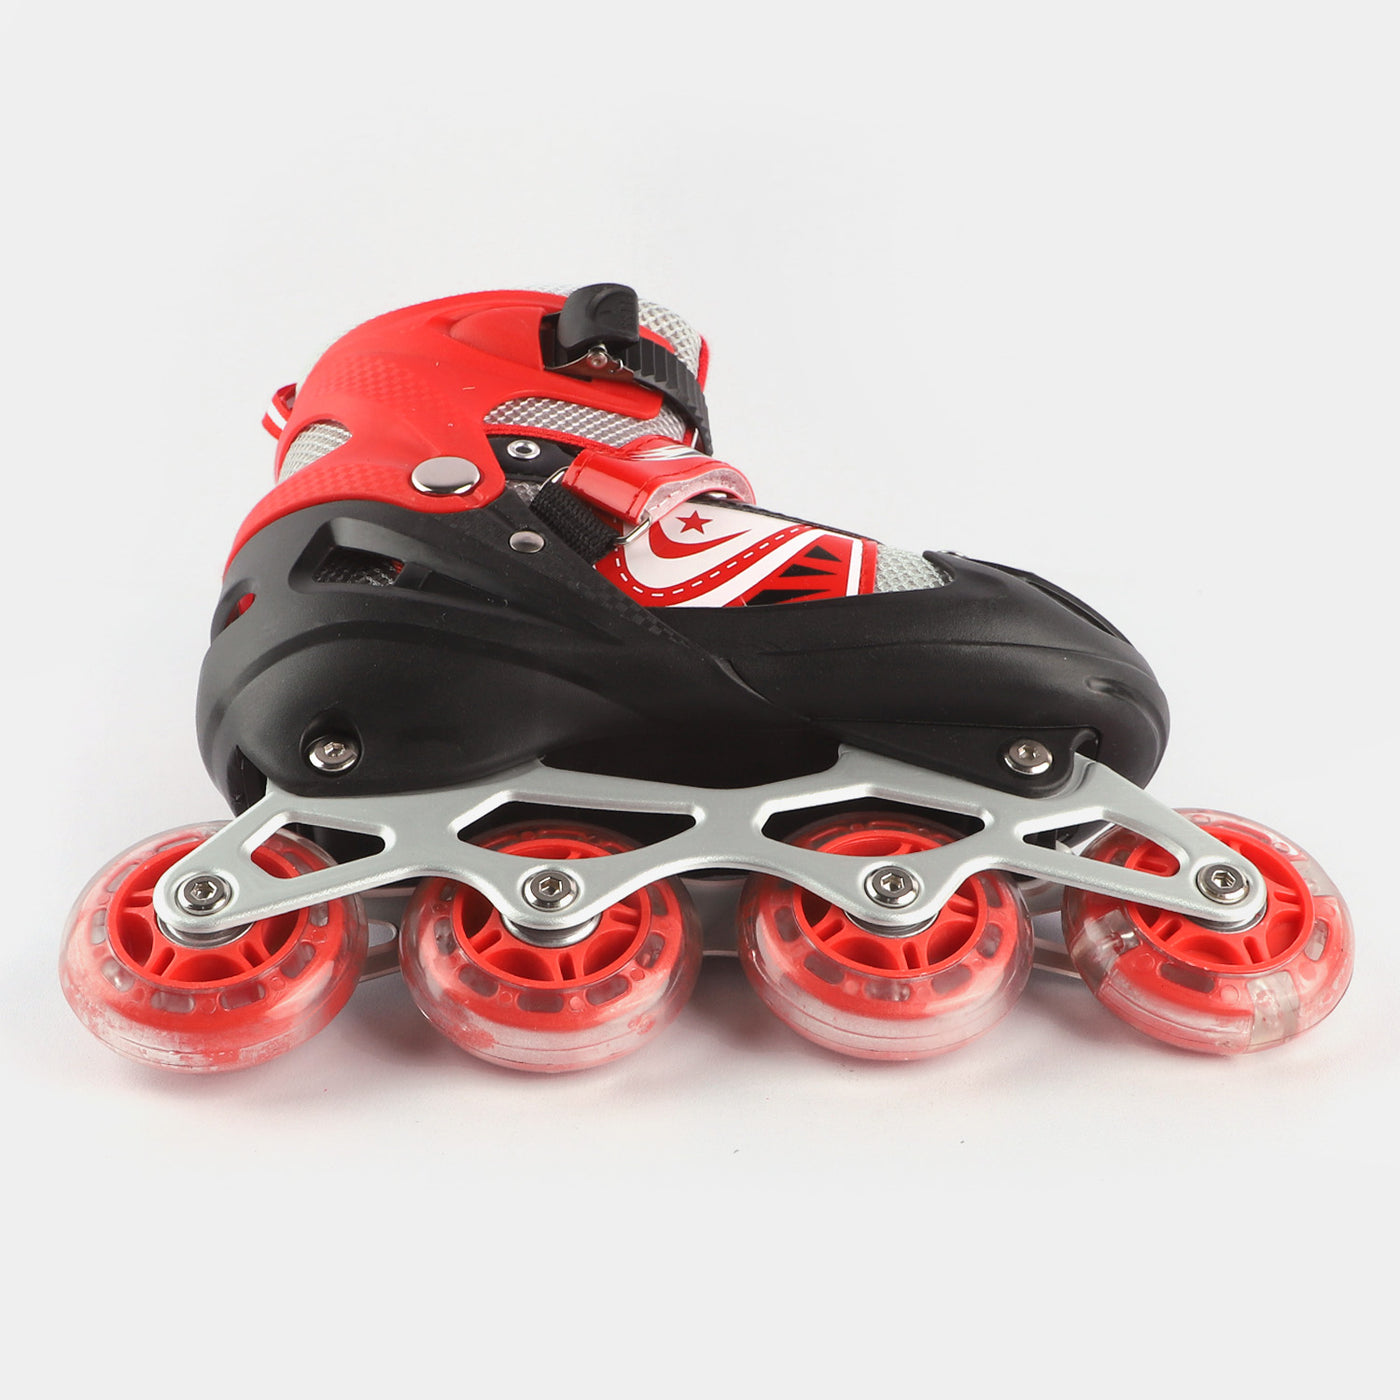 SPORTS SKATE SHOES WITH 6 IN 1 SAFETY PADS SET - RED